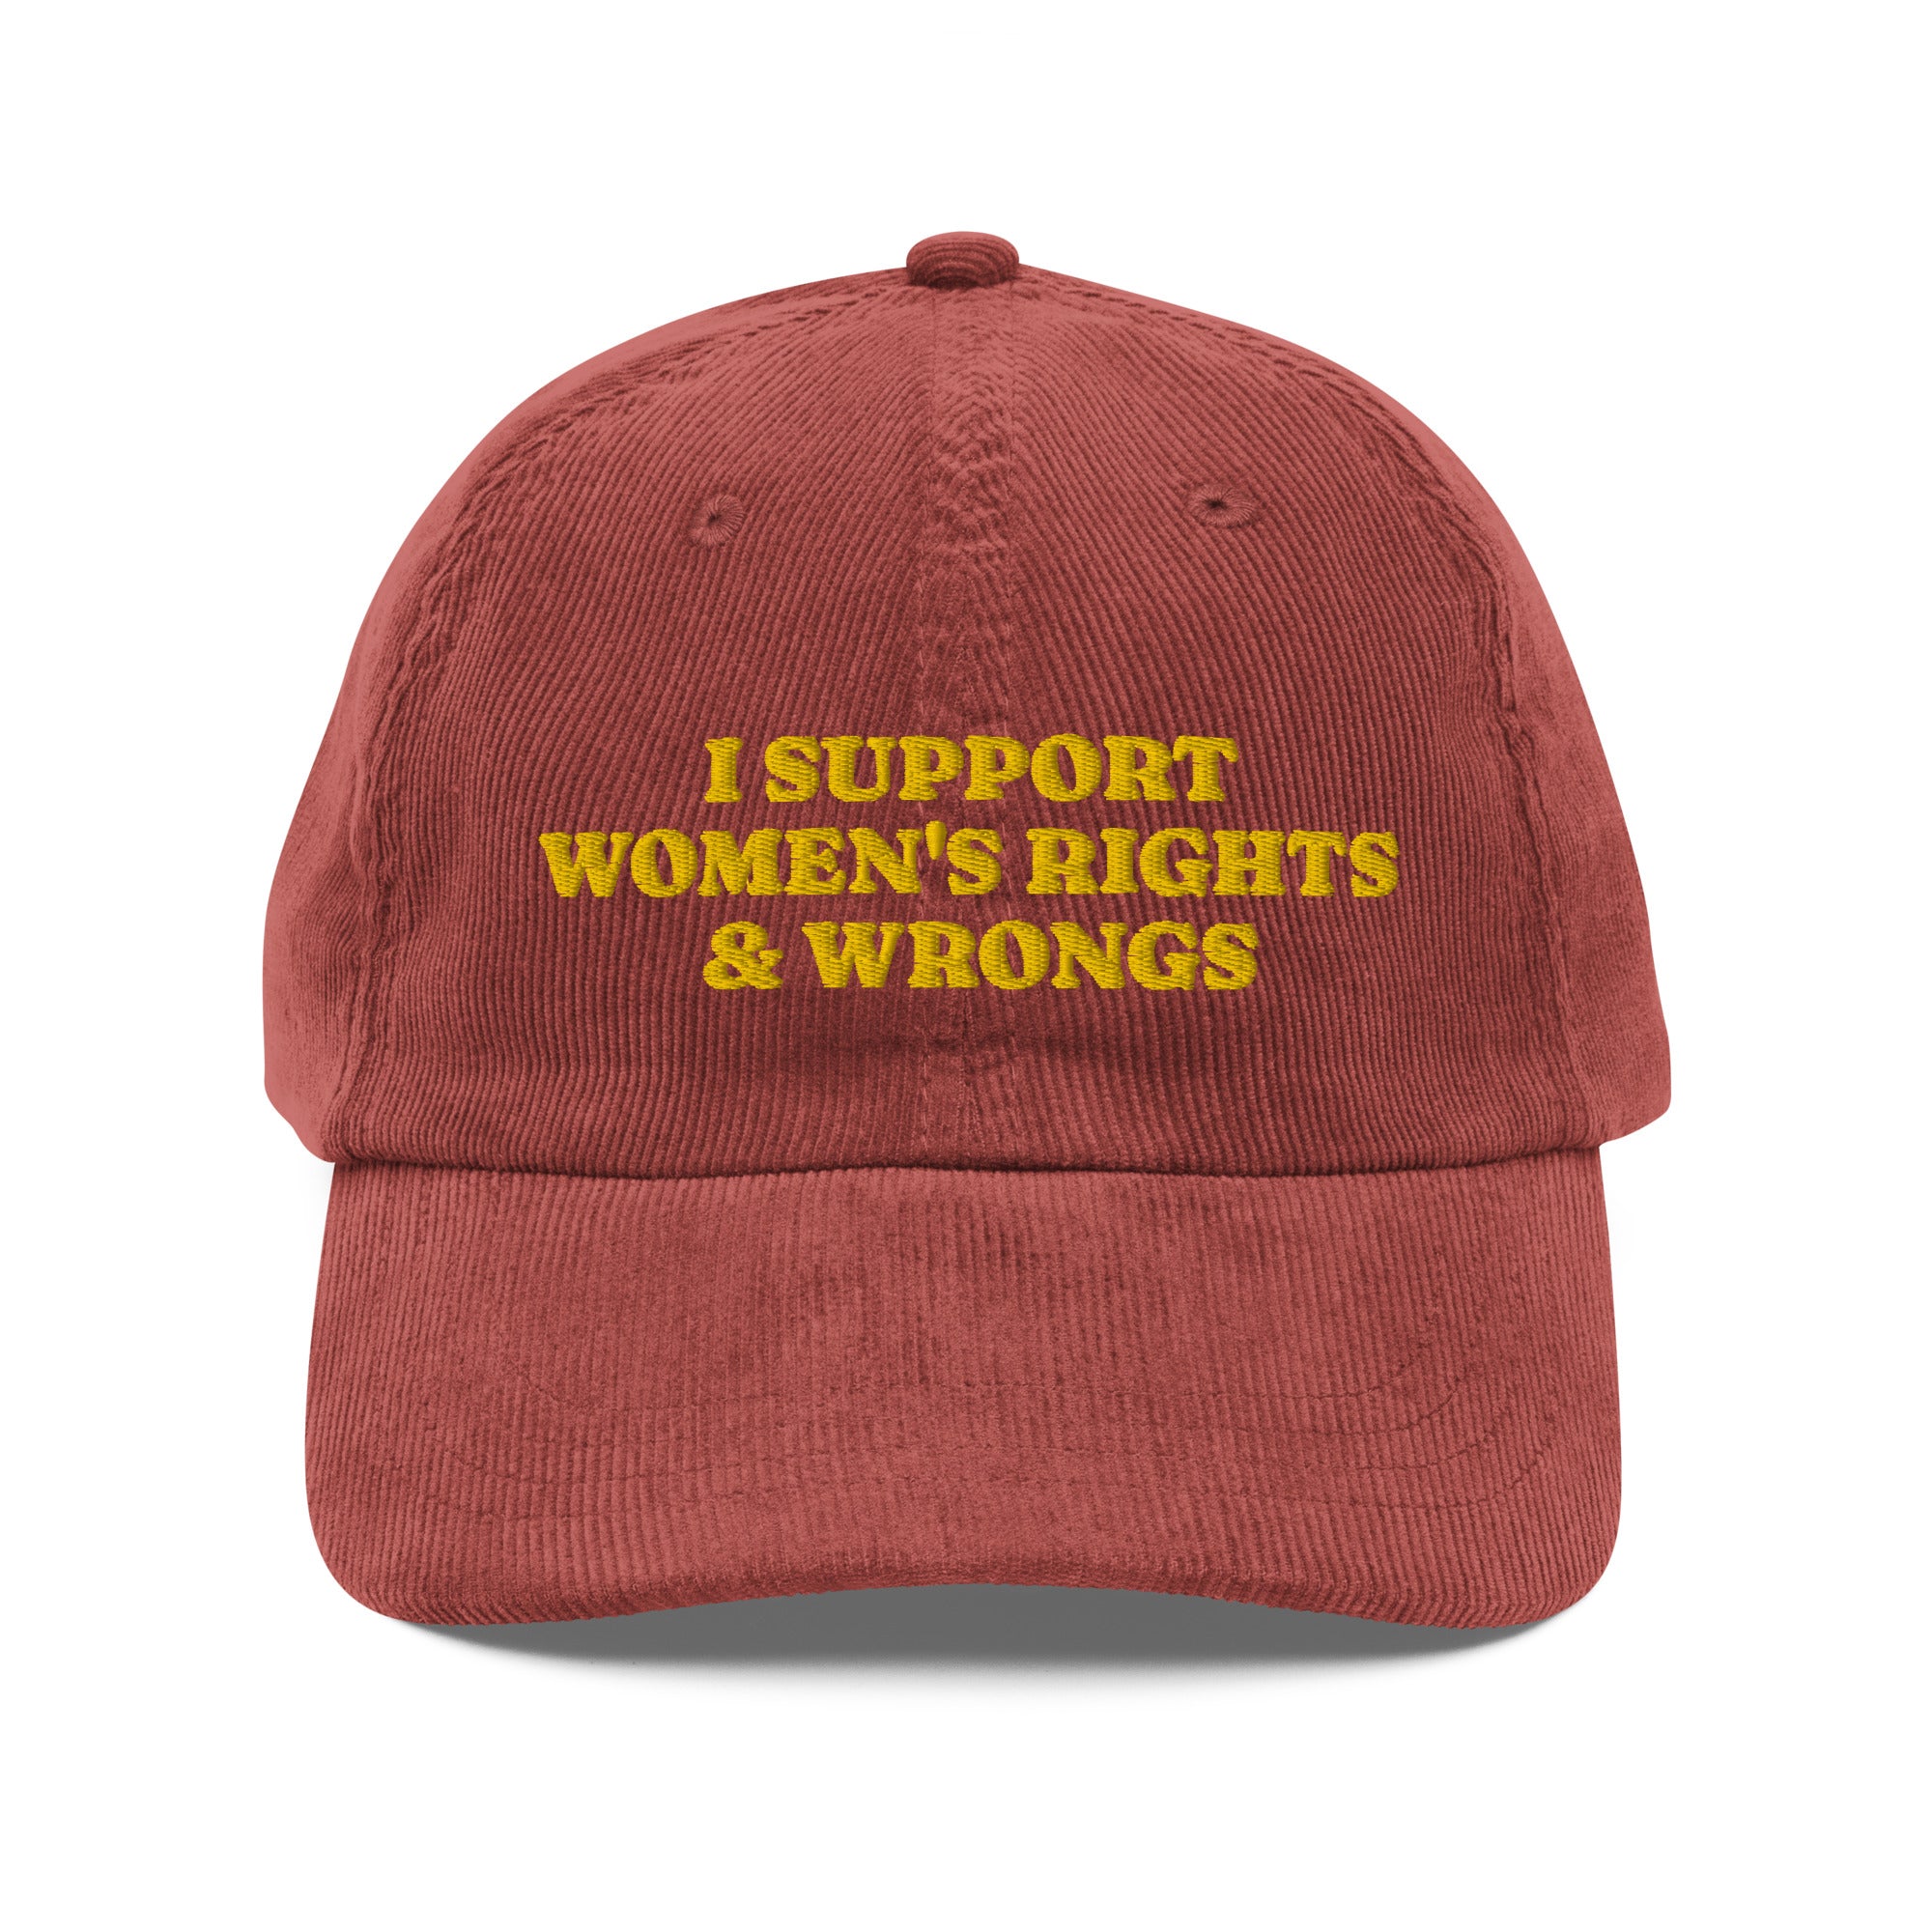 I Support Women's Rights & Wrongs Corduroy cap